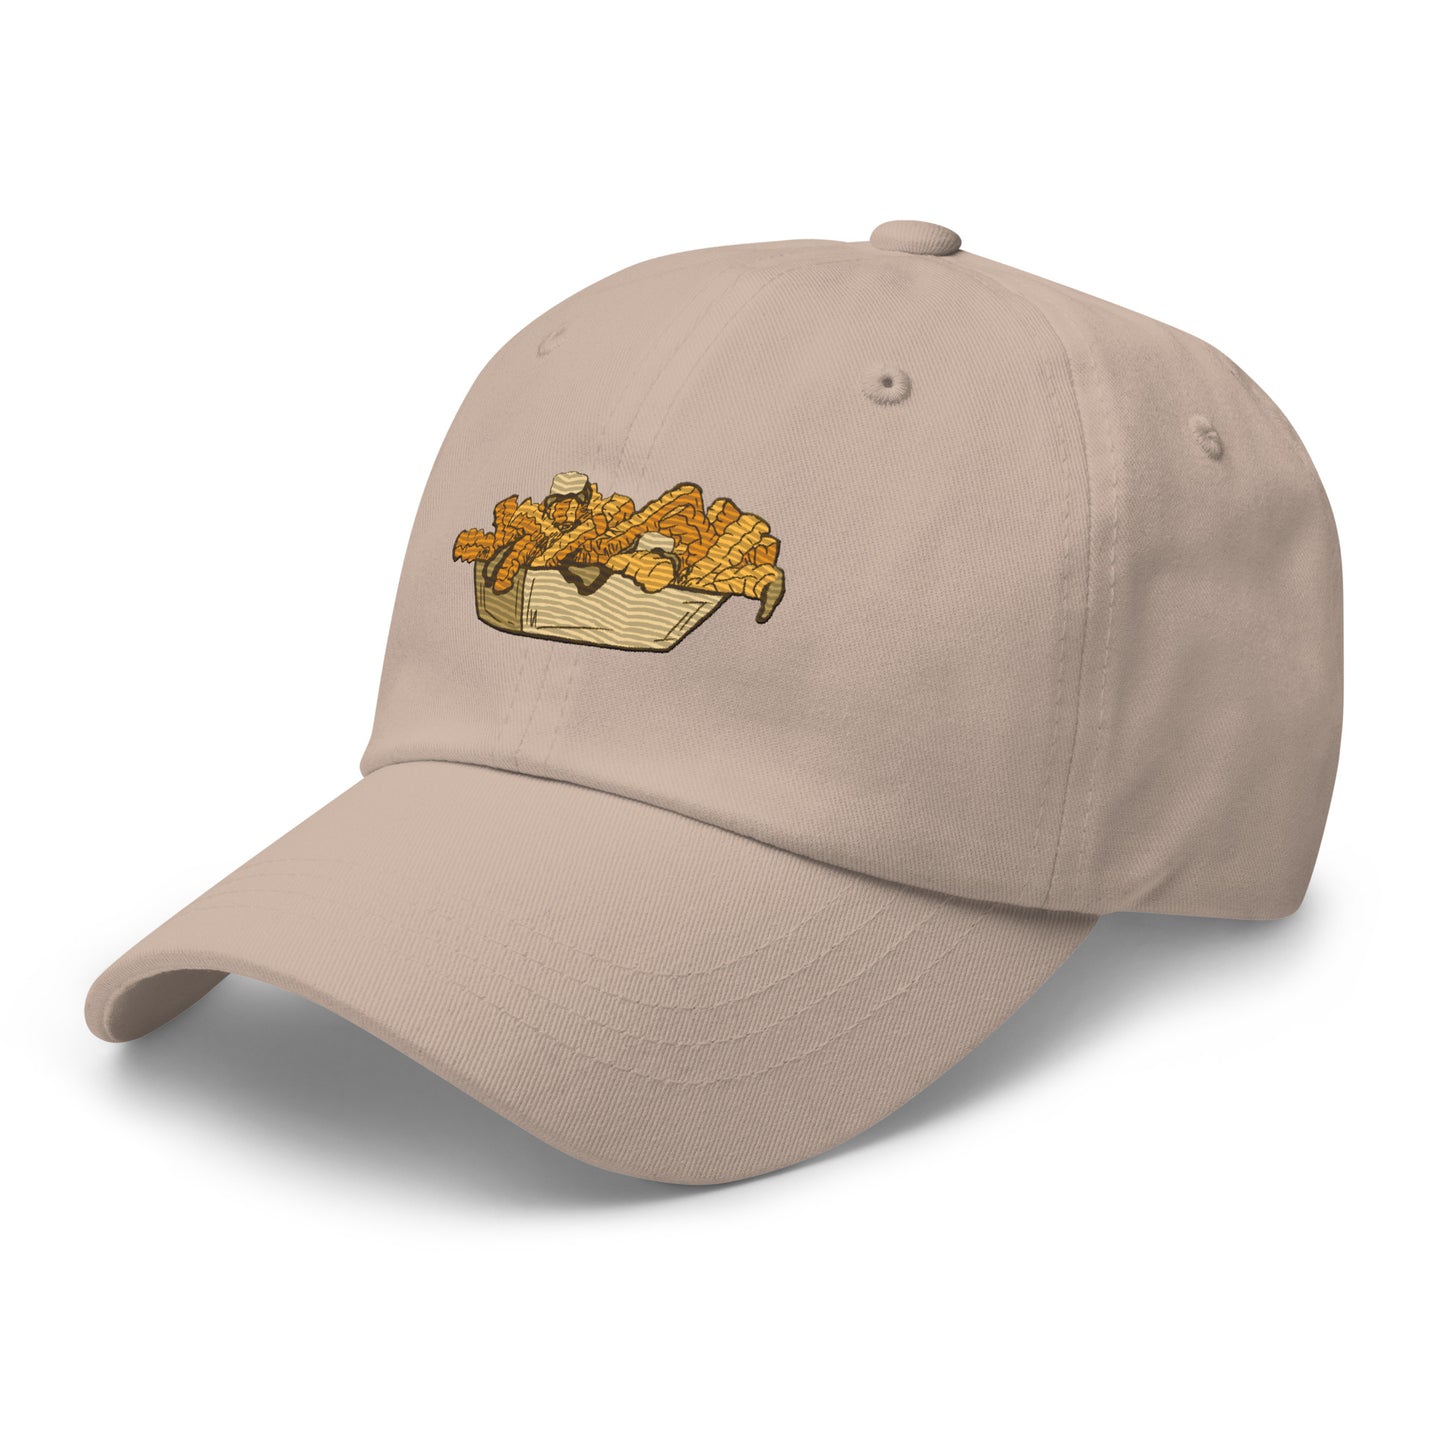 Body by Poutine Dad hat